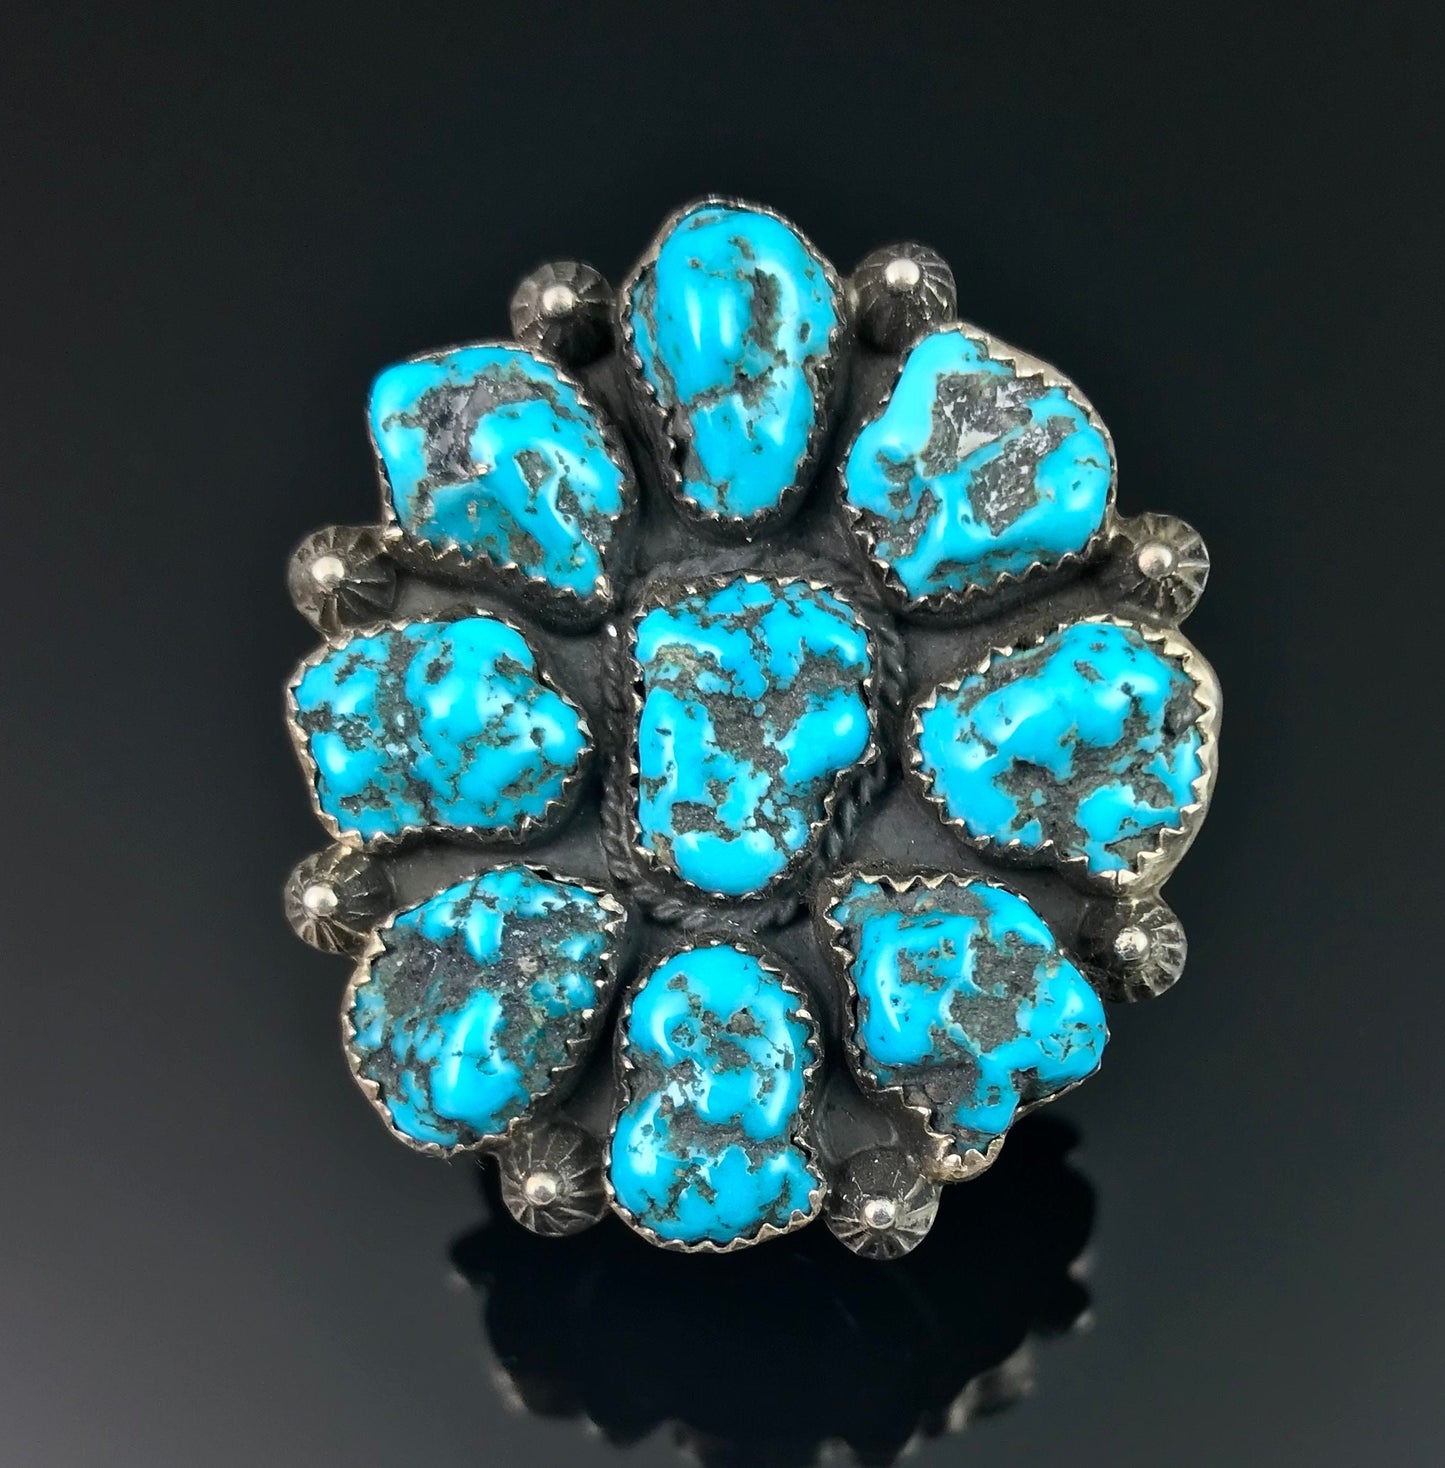 Sleeping Beauty Turquoise Nugget Cluster Ring Navajo Adjustable Size Signed - Arnold Goodluck